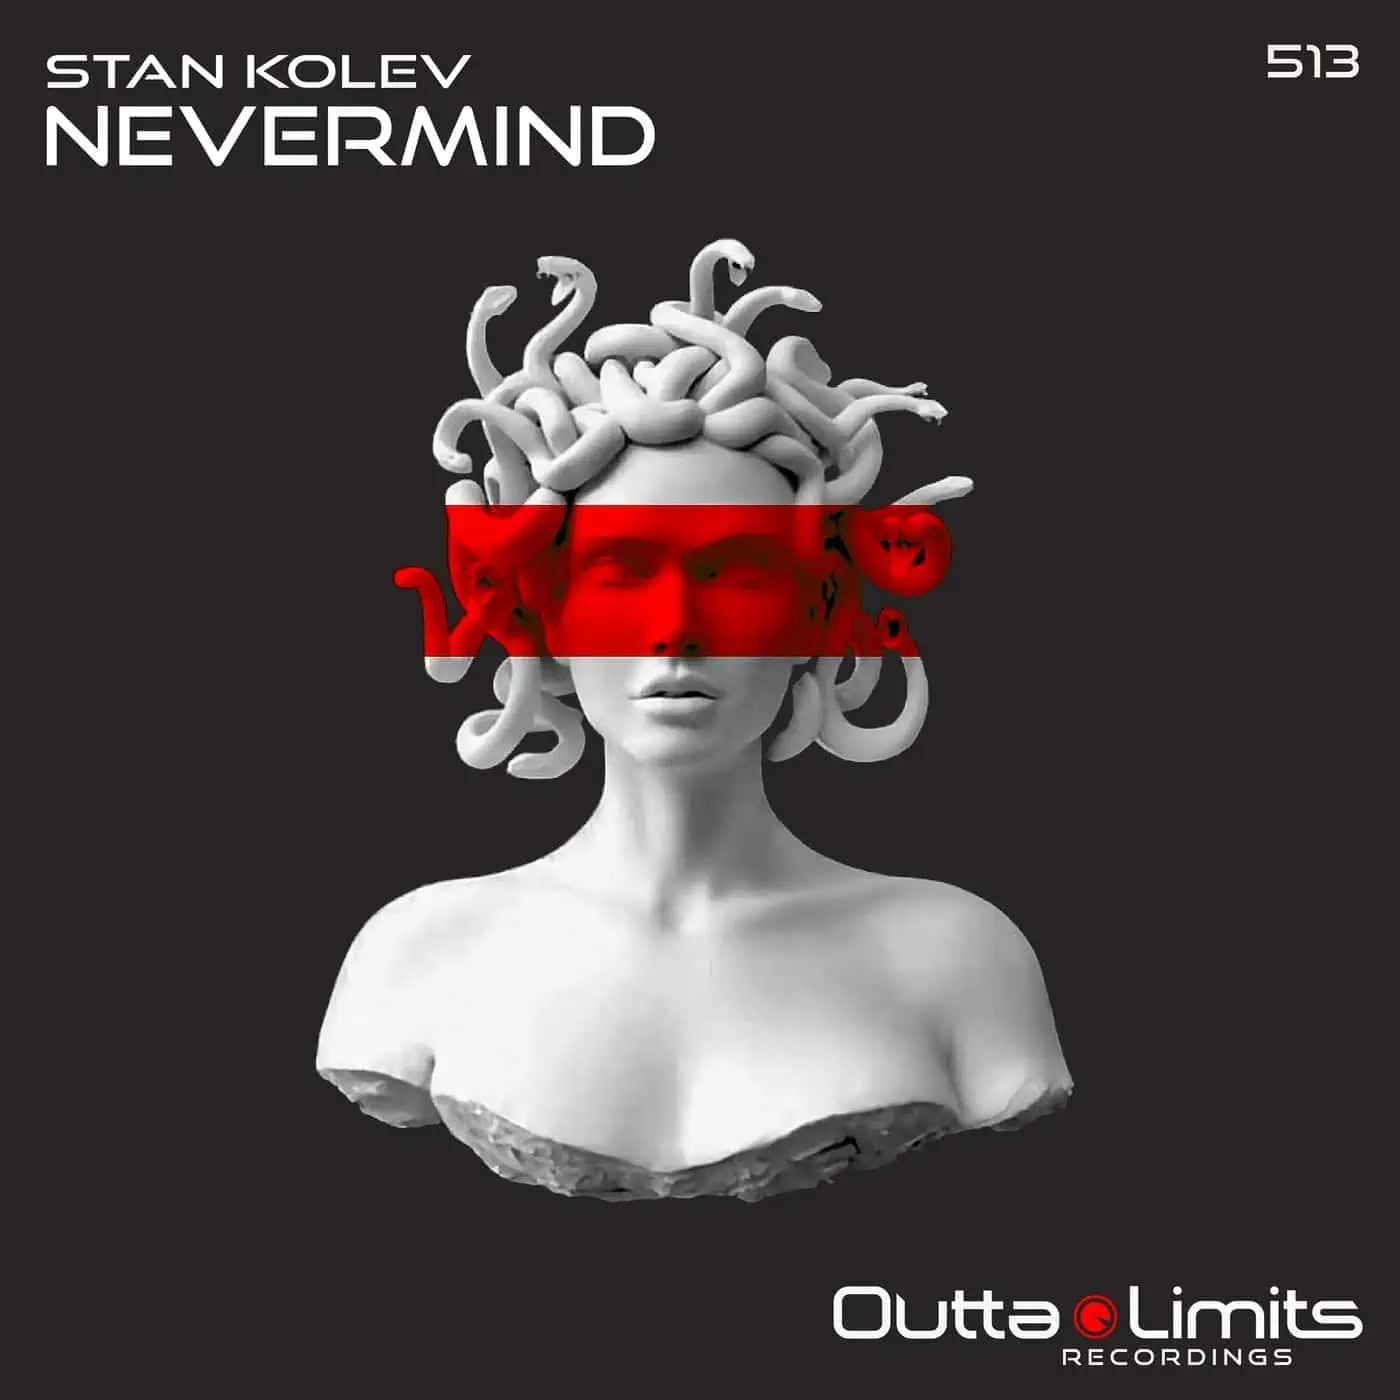 image cover: Nevermind by Stan Kolev on Outta Limits